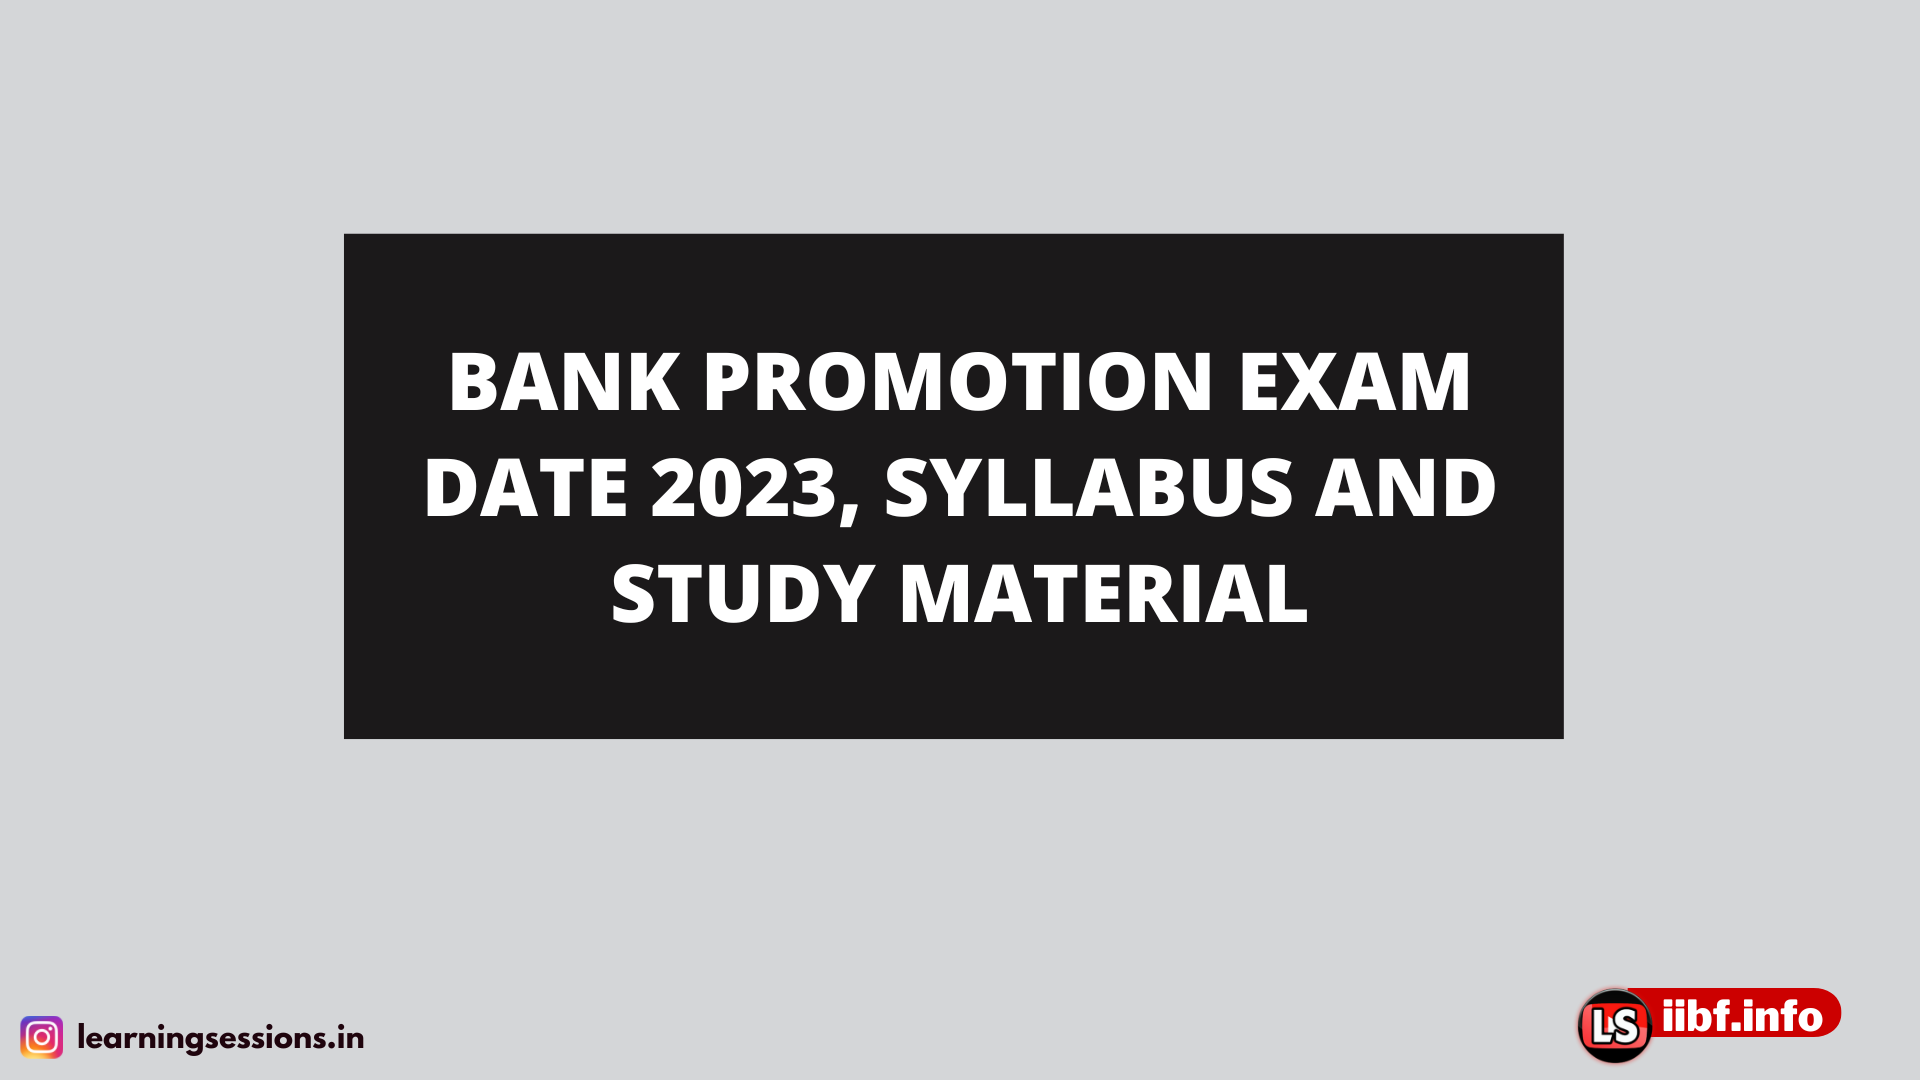 BANK PROMOTION EXAM DATE 2023, SYLLABUS AND STUDY MATERIAL